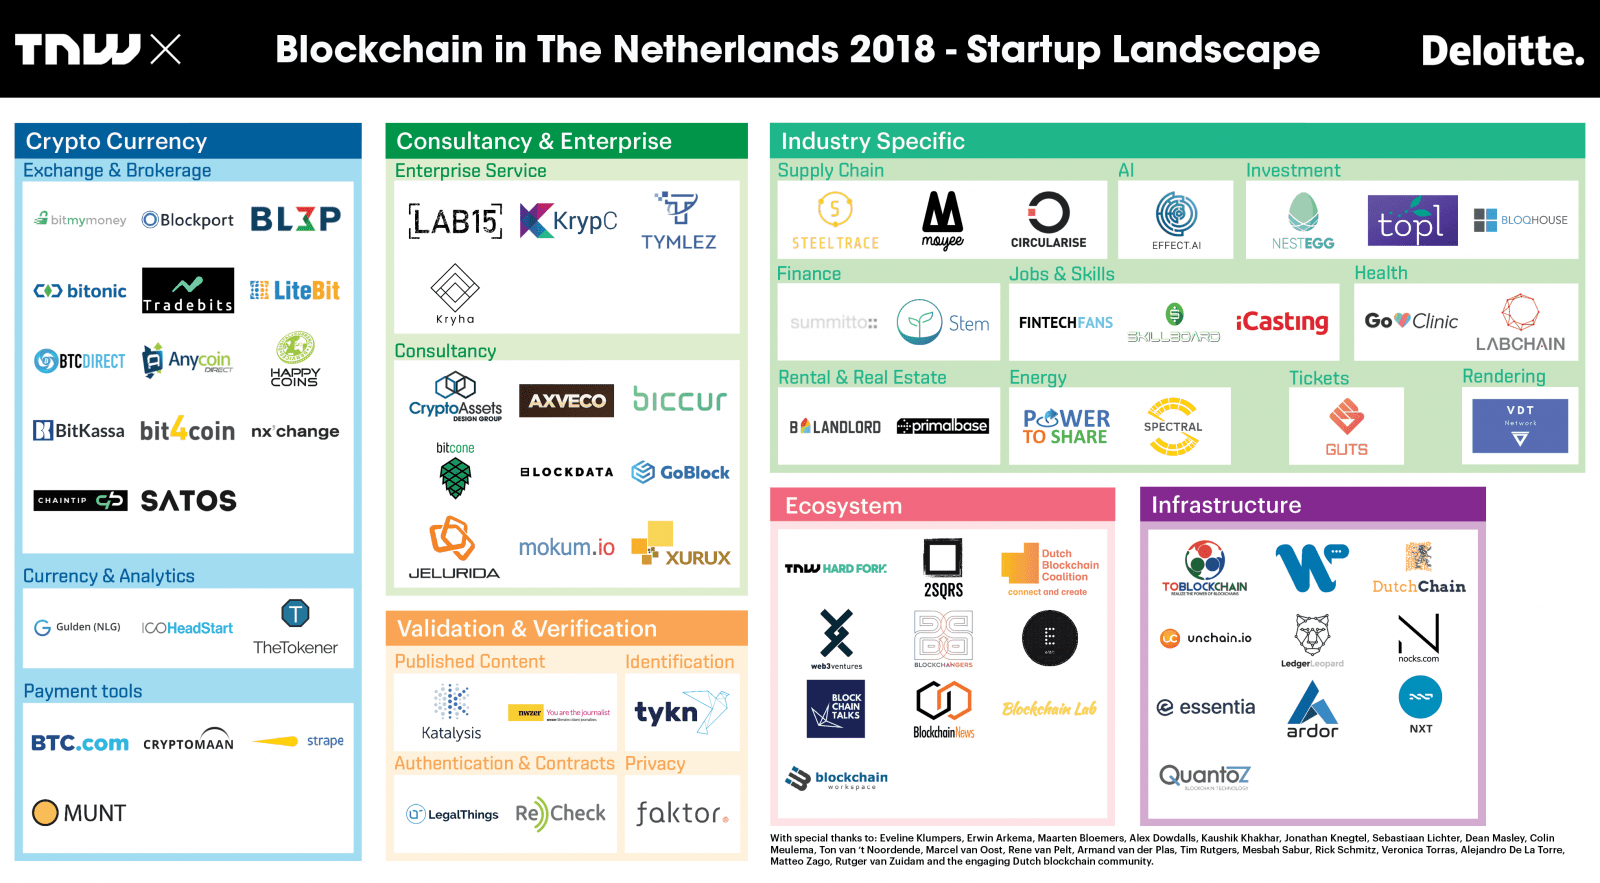 ReCheck is included in the TNW X Startup Landscape Chart